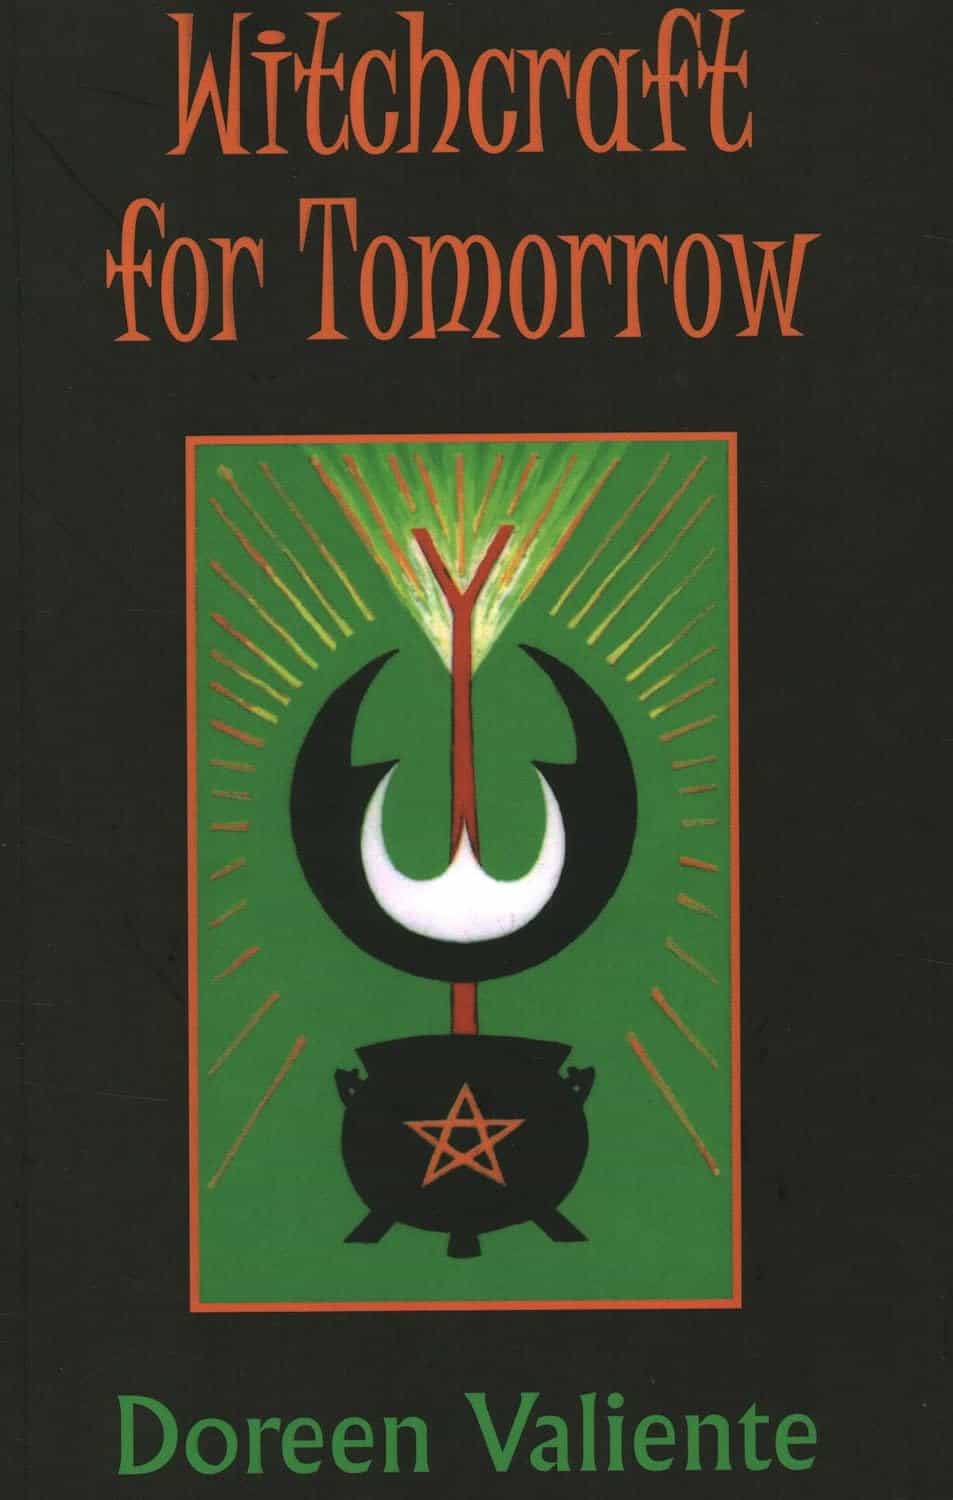 "Witchcraft for Tomorrow" by Doreen Valiente